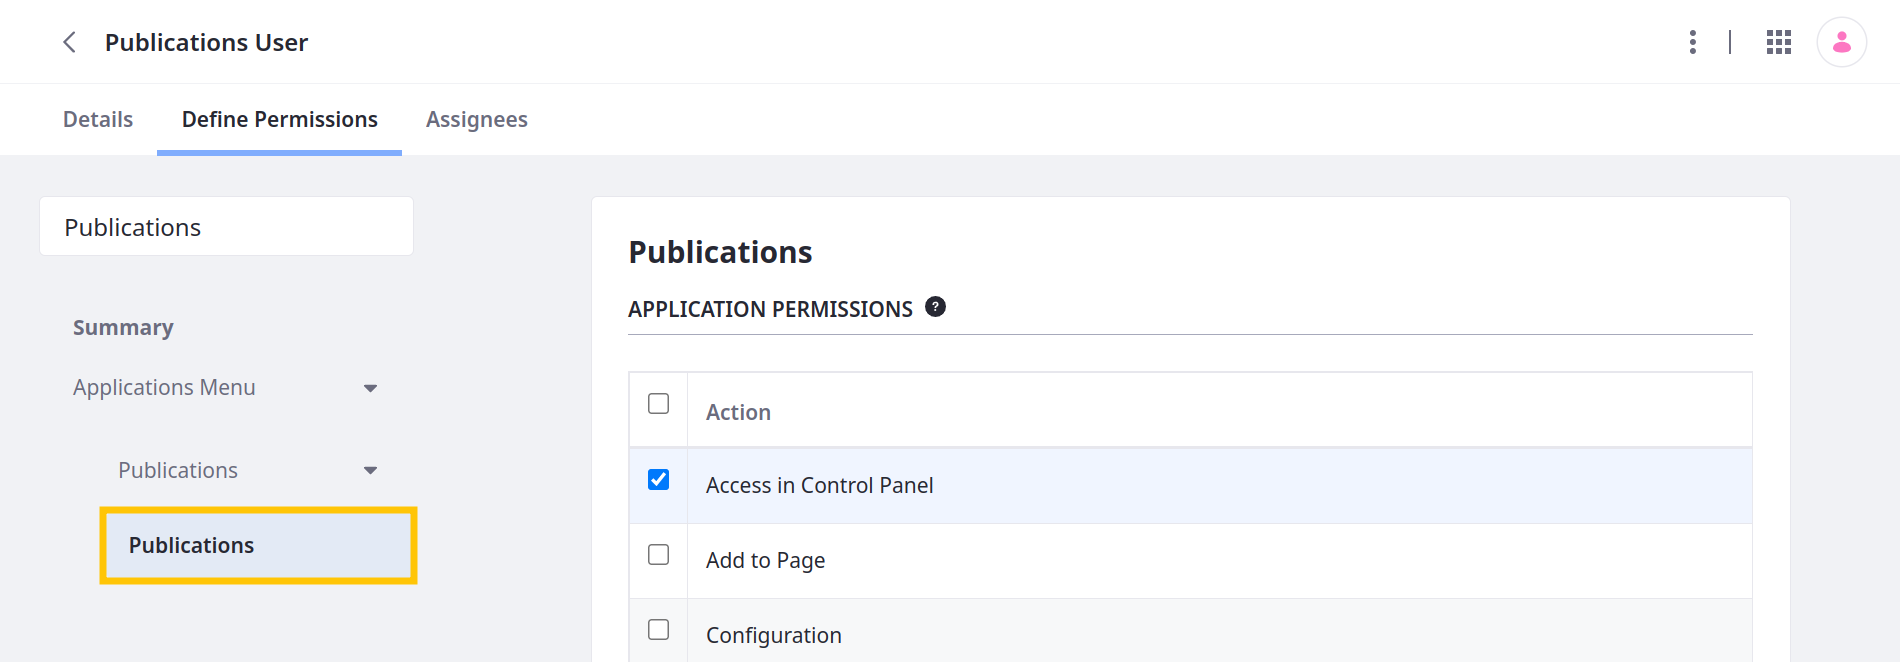 Add additional regular roles or configure other role permissions.